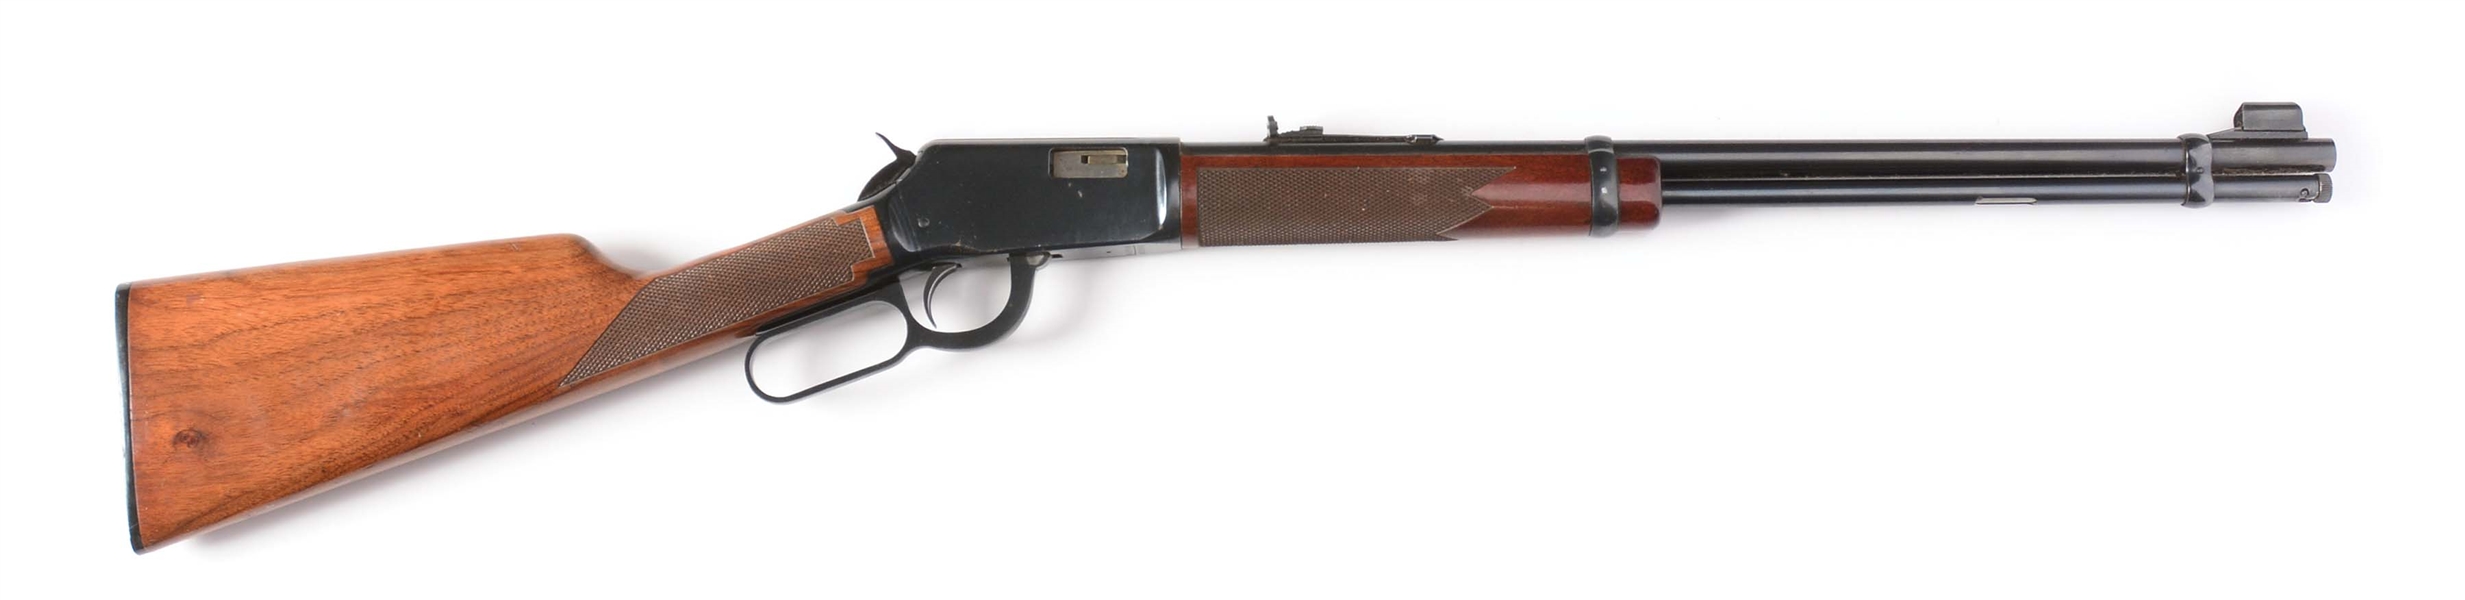 (M) WINCHESTER 9422 XTR LEVER-ACTION RIFLE.